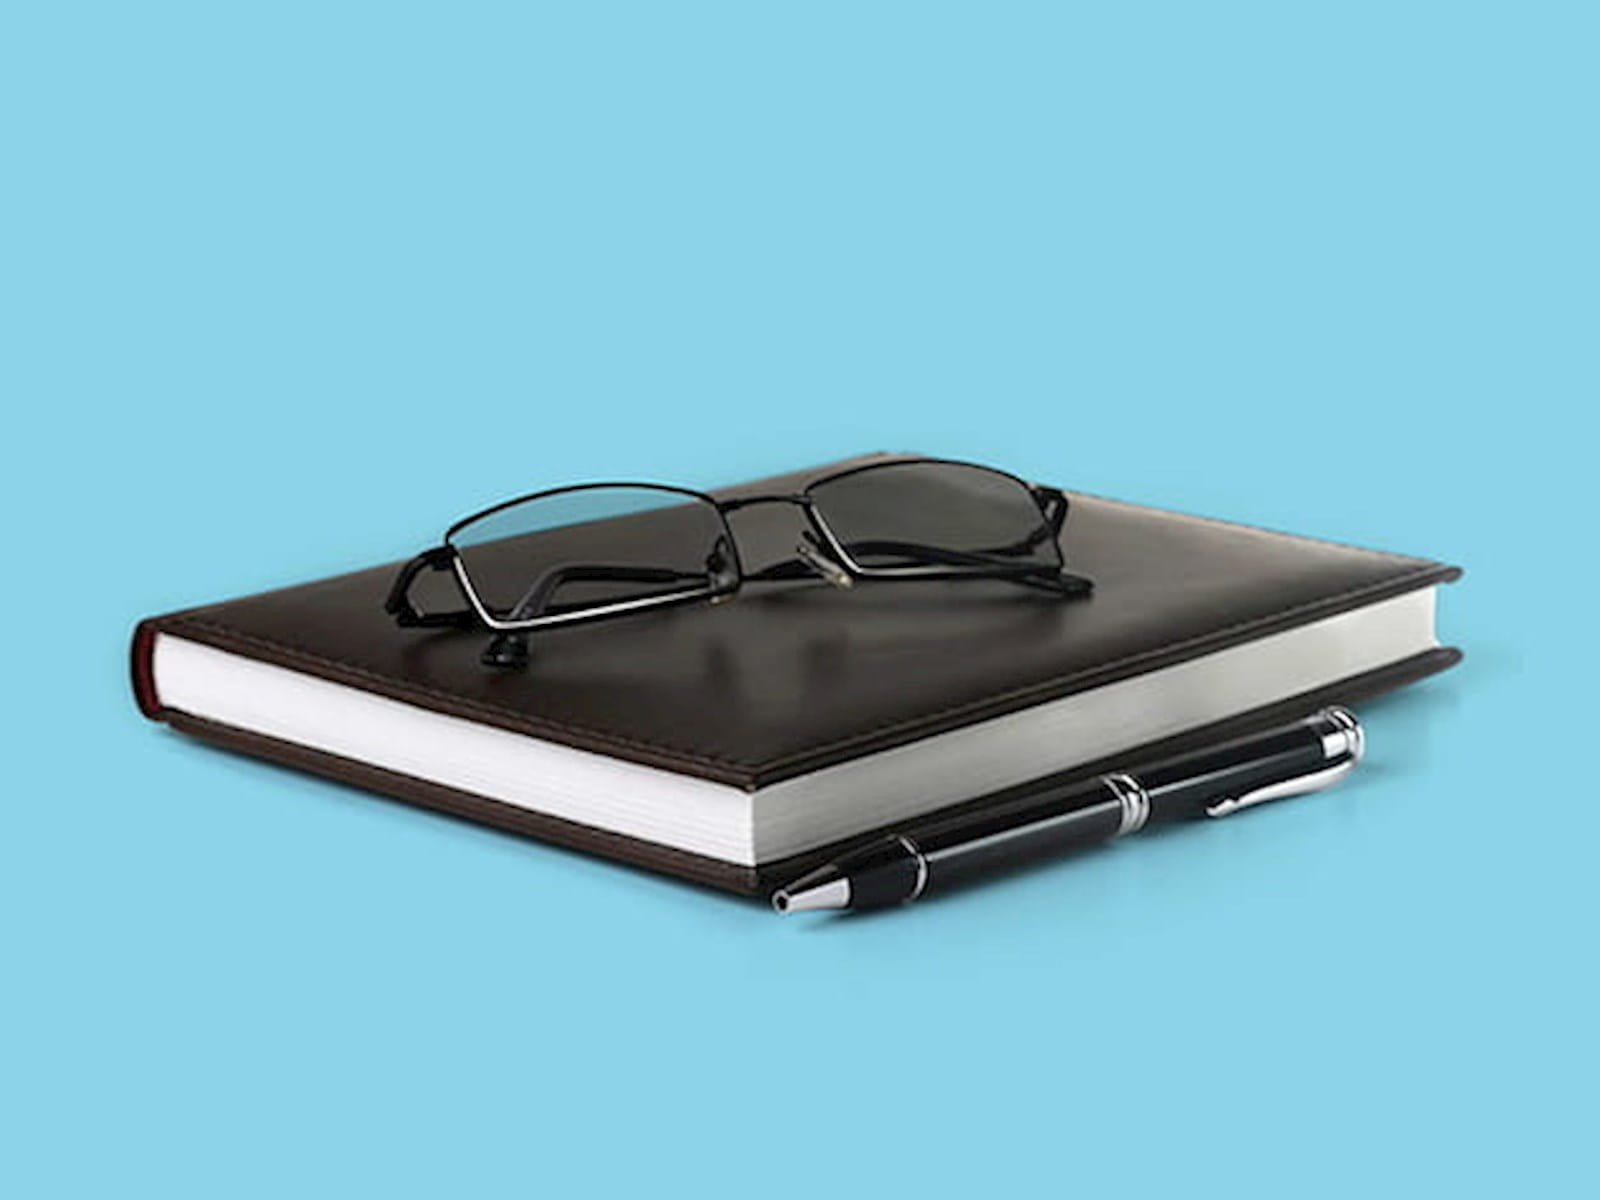 A notebook, pen and pair of glasses